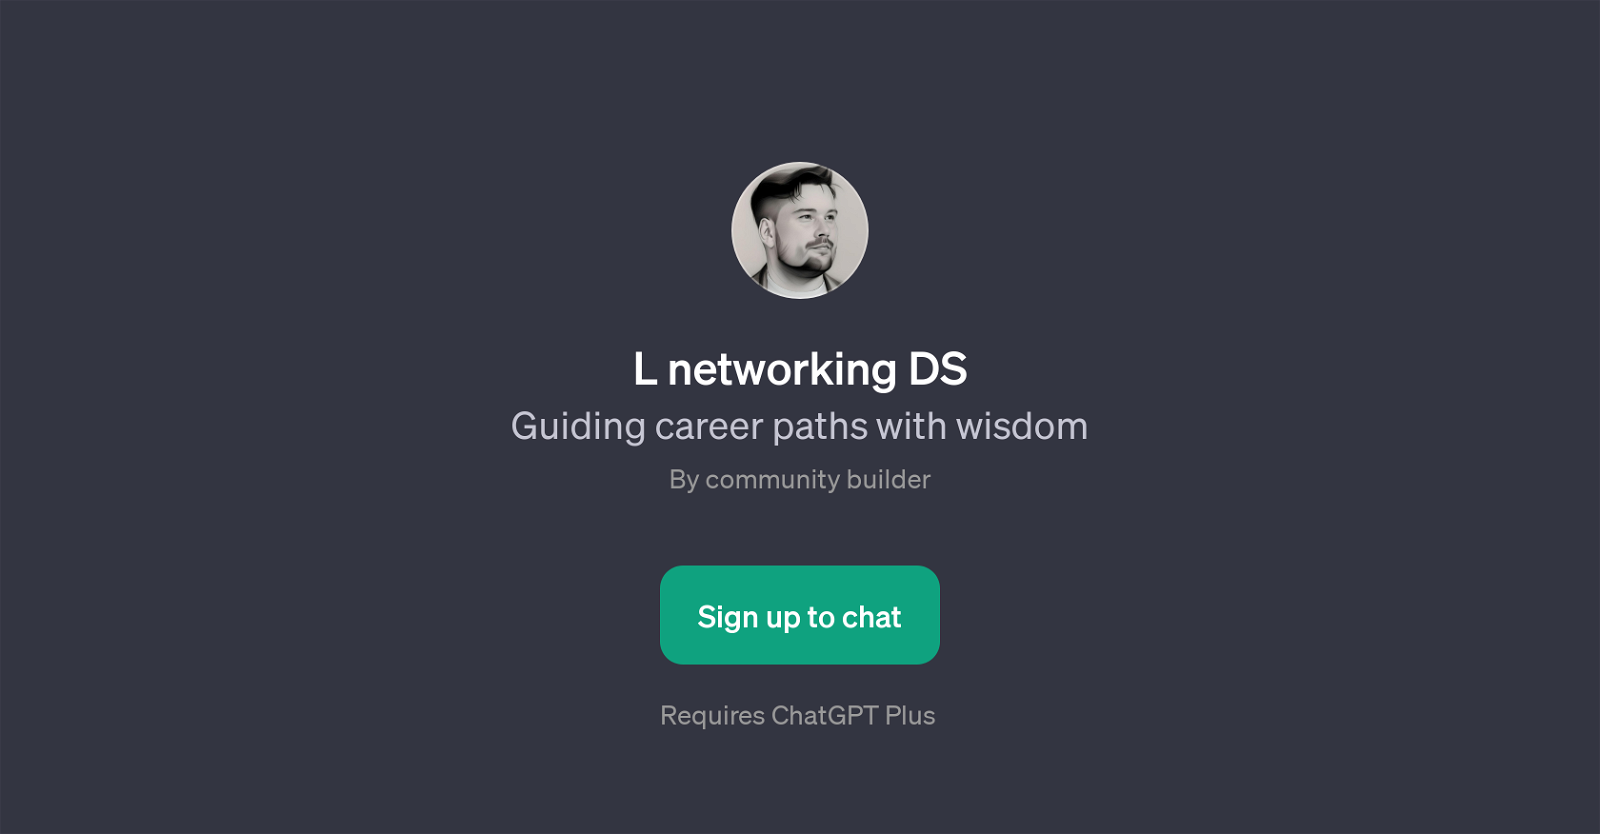 L networking DS website